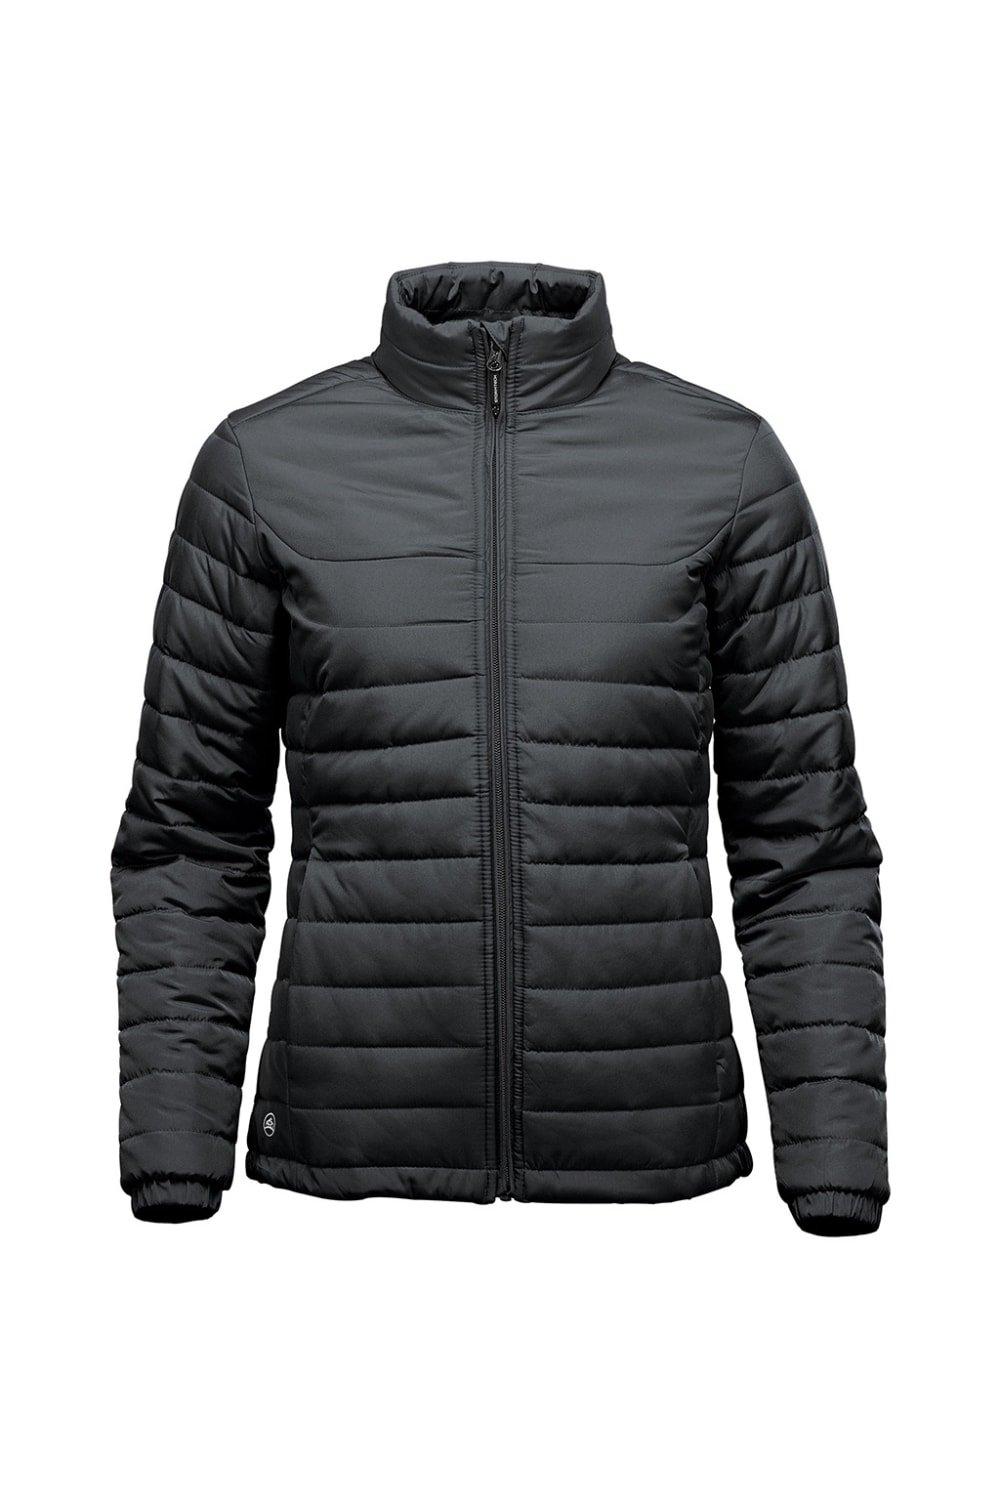 Stormtech Women's Nautilus Quilted Padded Jacket|Size: L|black